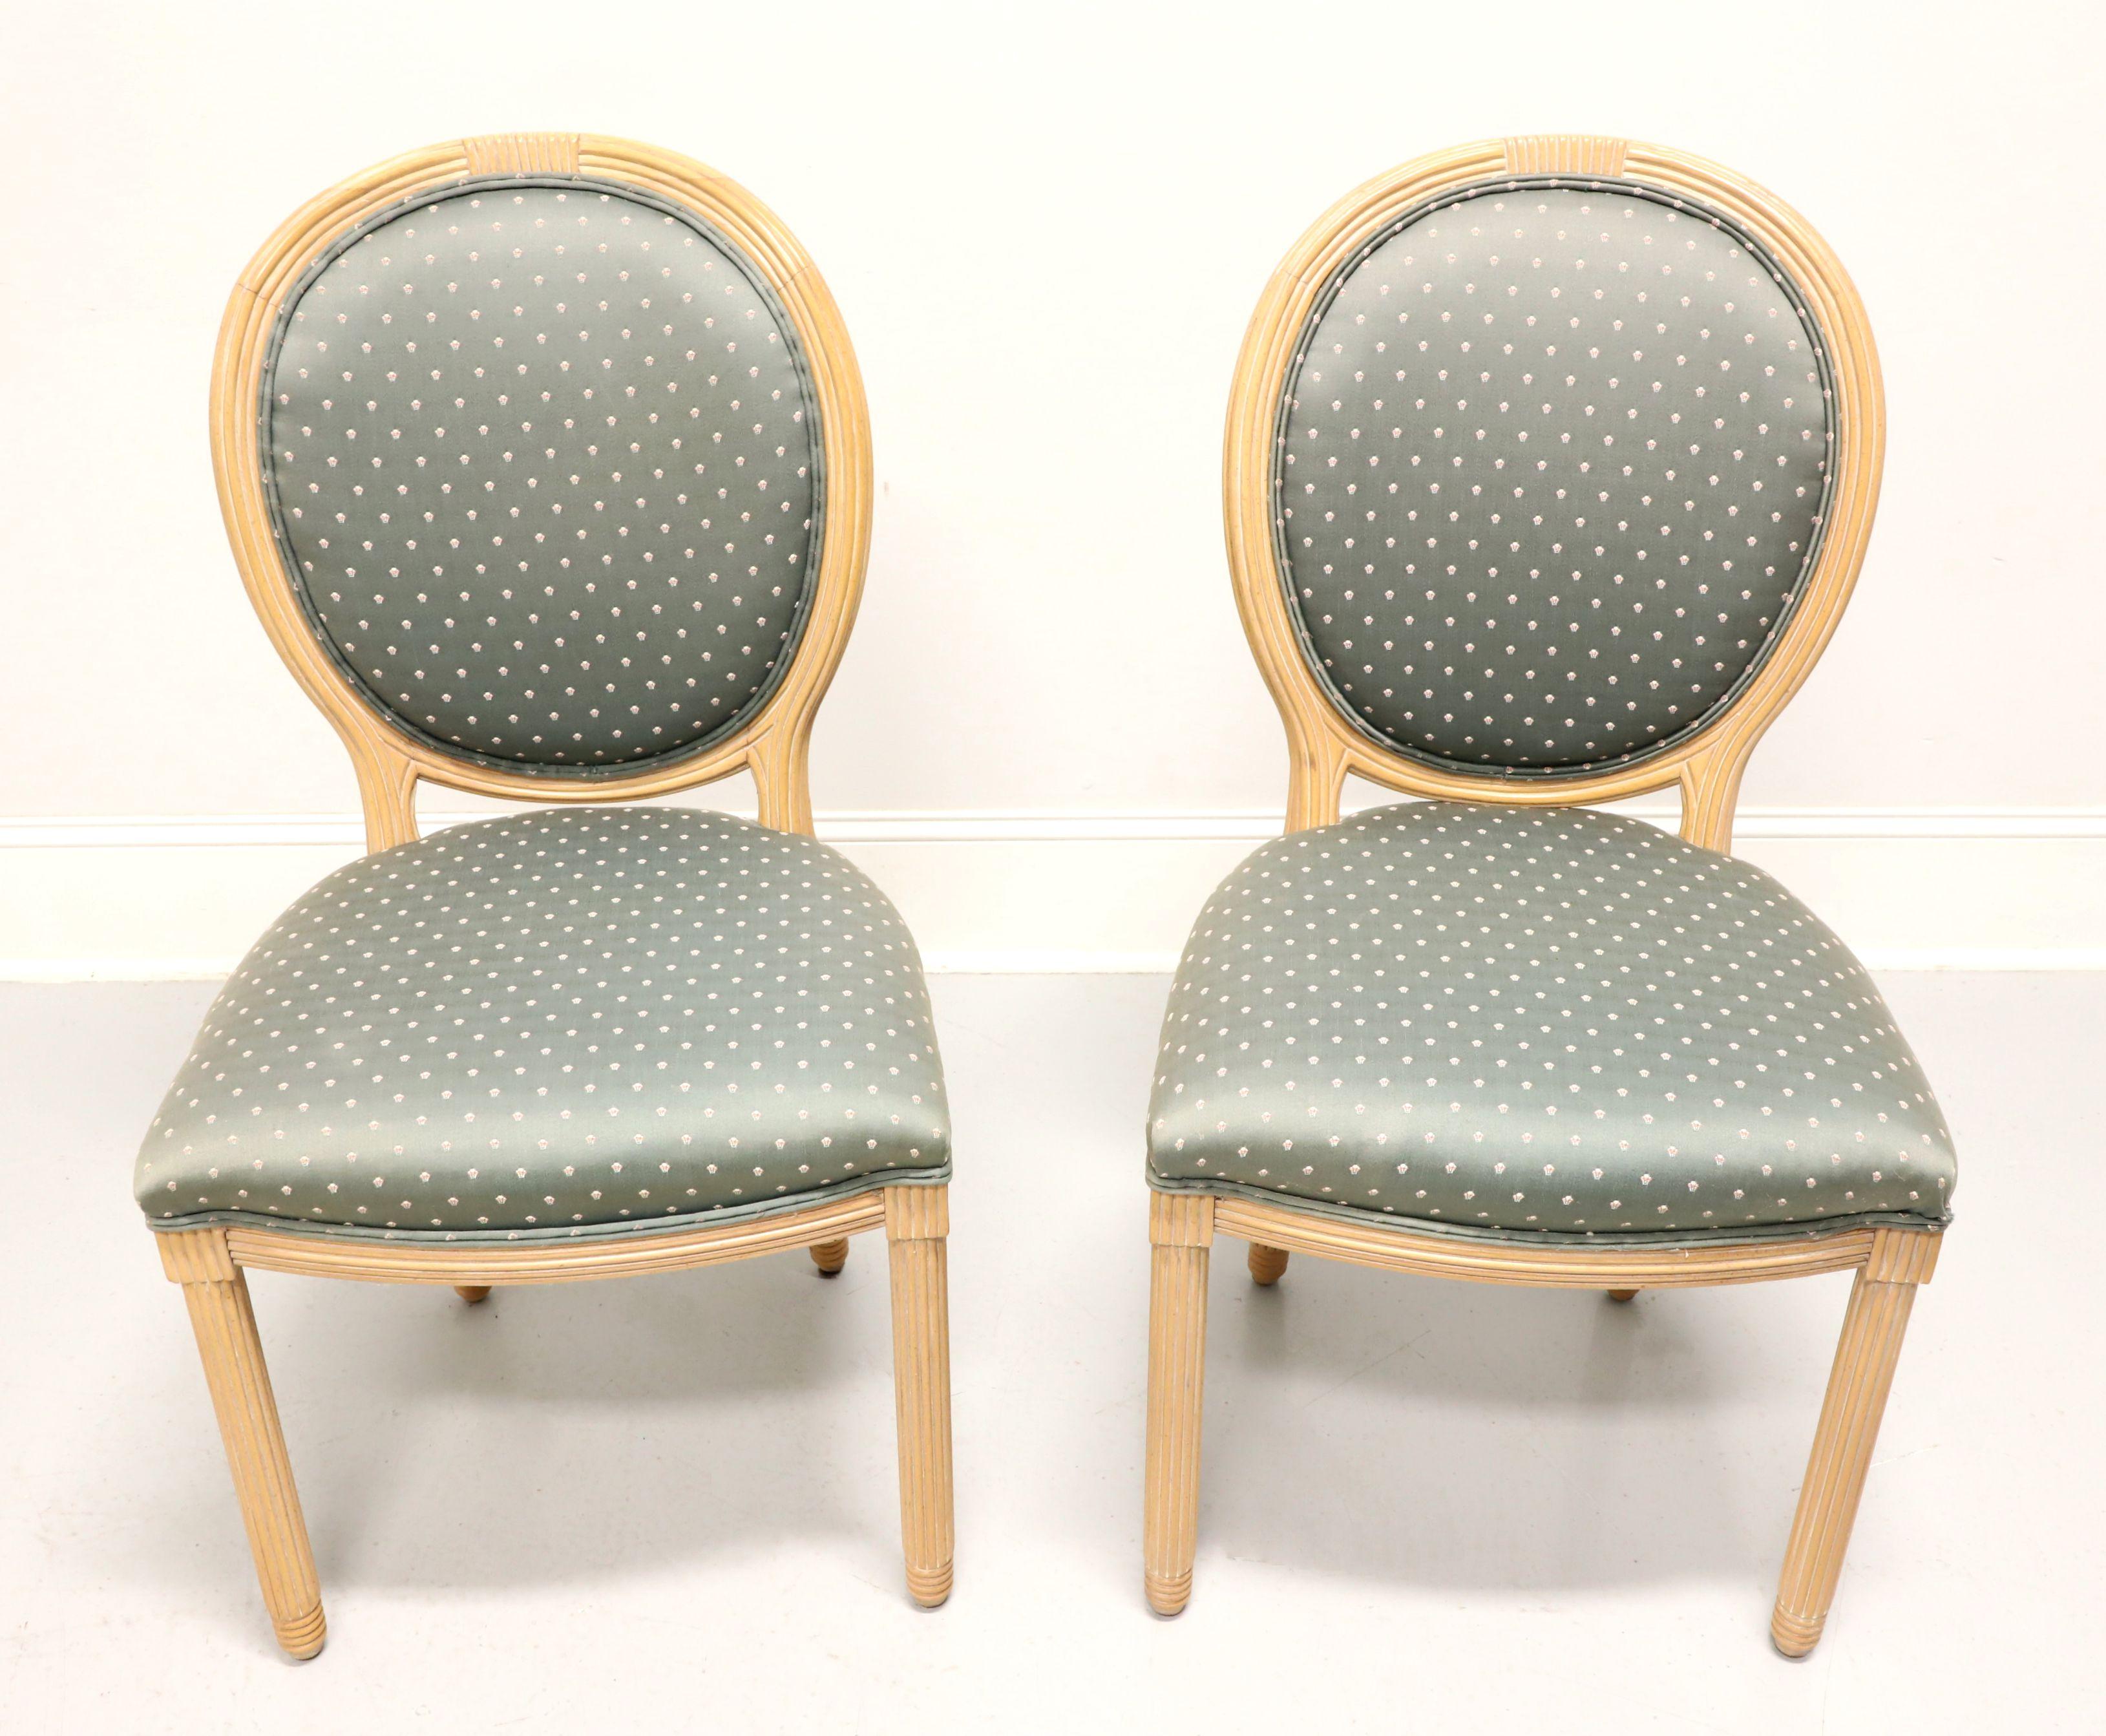 A pair of French Provincial Louis XVI style dining side chairs by American of Martinsville. Solid hardwood with a whitewashed & slightly antiqued finish, decoratively fluted oval back, sage green color fabric upholstered back & seat, fluted apron,